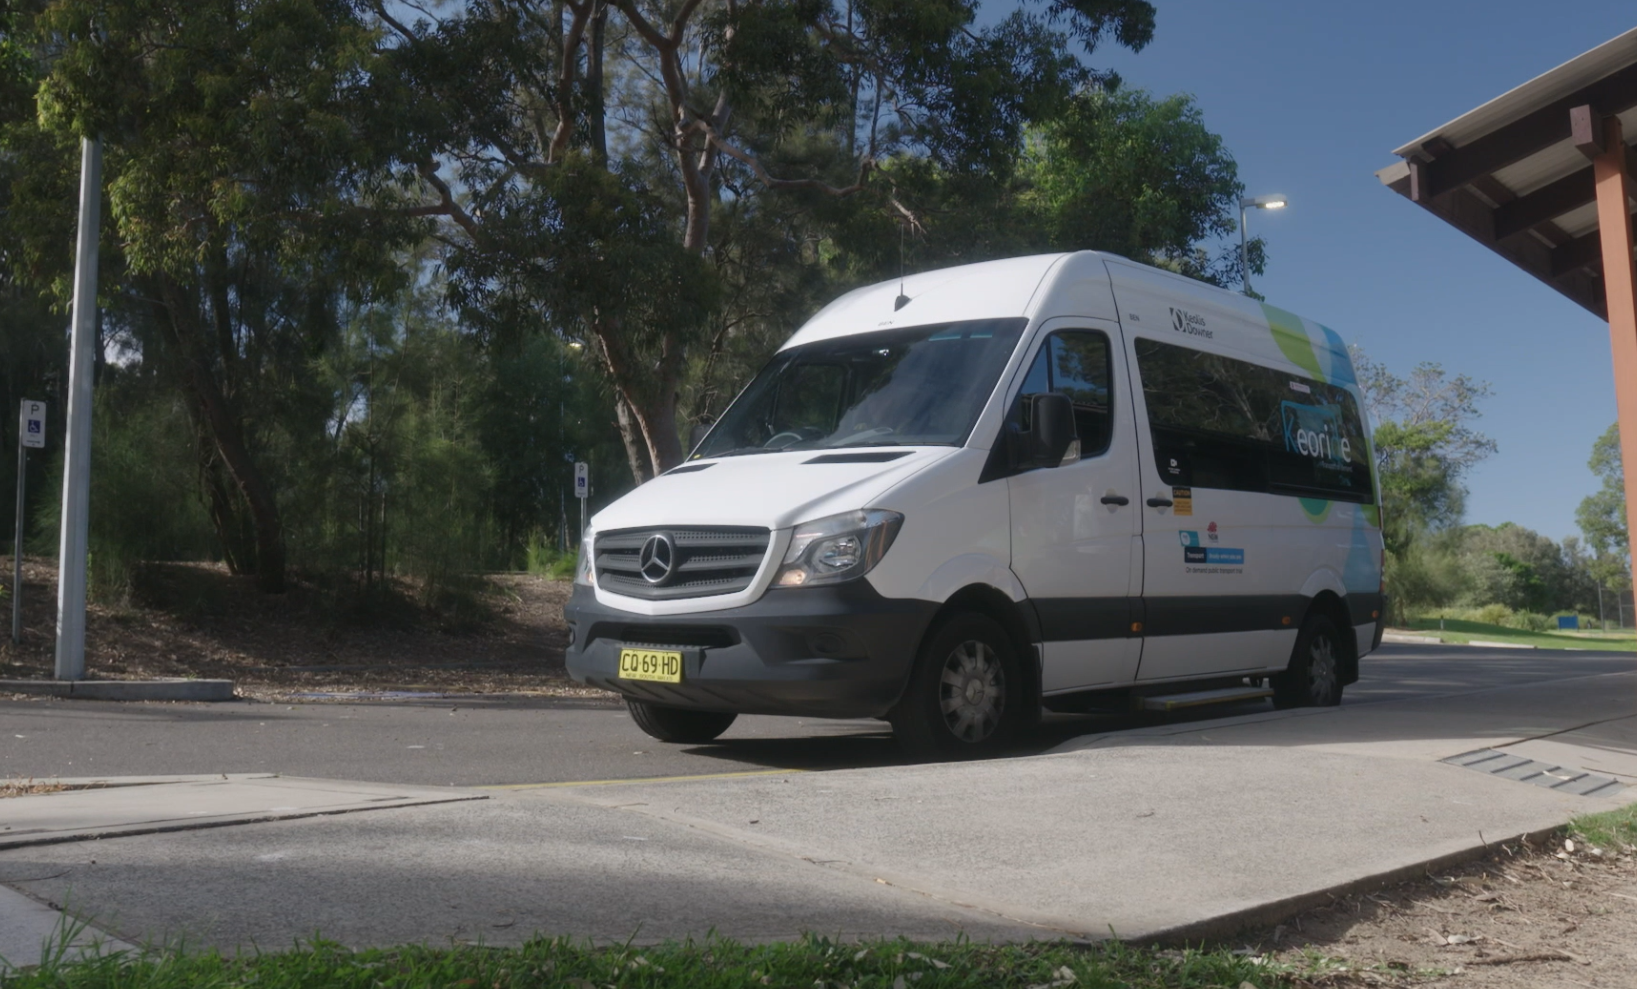 Keolis Downer partners with TfNSW to deliver innovative transport solutions in Sydney’s Northern beaches as the future bus operator